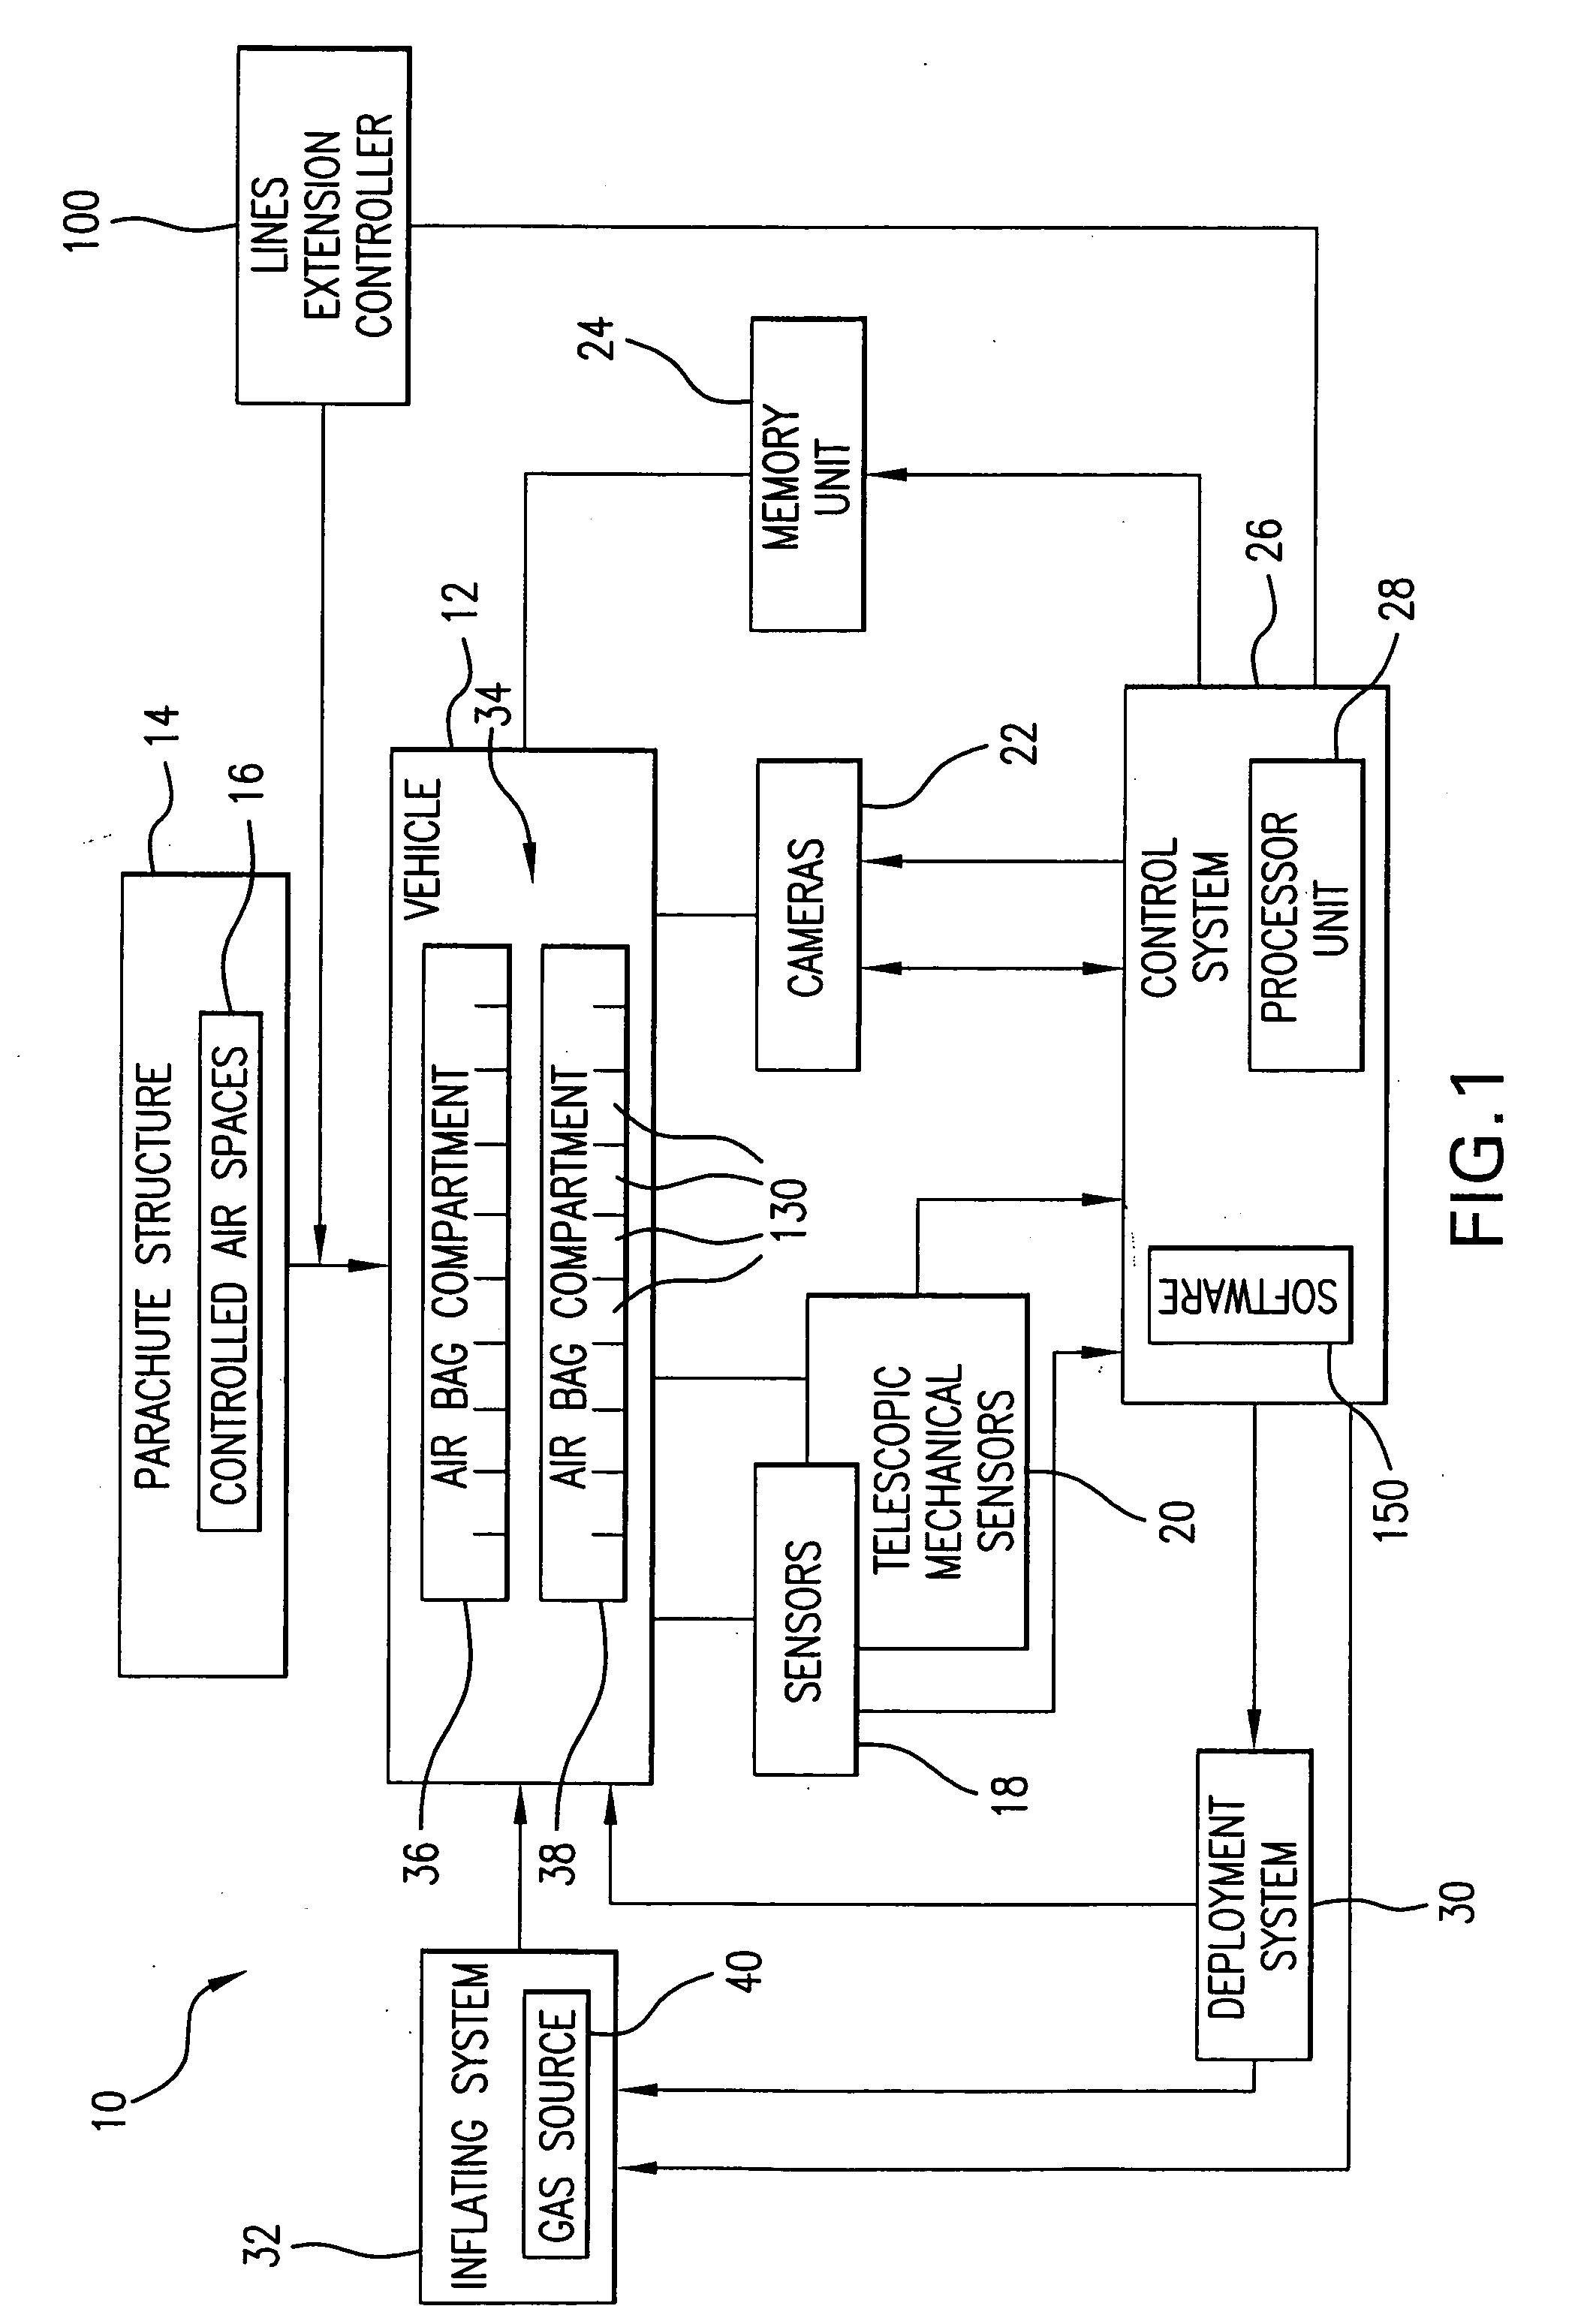 Safety pre-impact deceleration system for vehicles